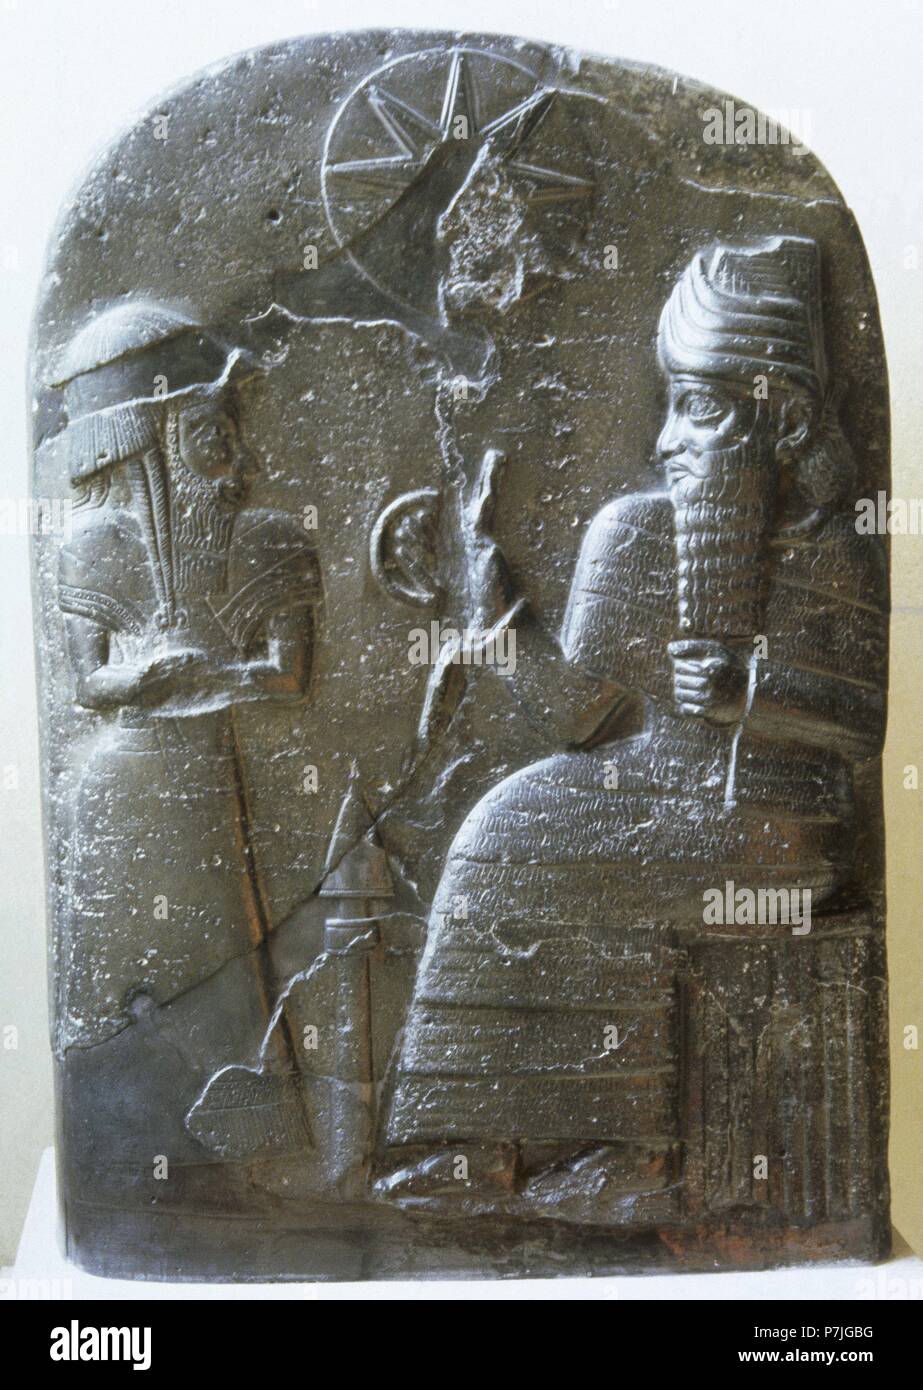 Babylonian stele usurped by Elamite King. Basalt. 1155-1185 BC. From Susa, Iraq. Louvre Museum. Paris, France. Stock Photo